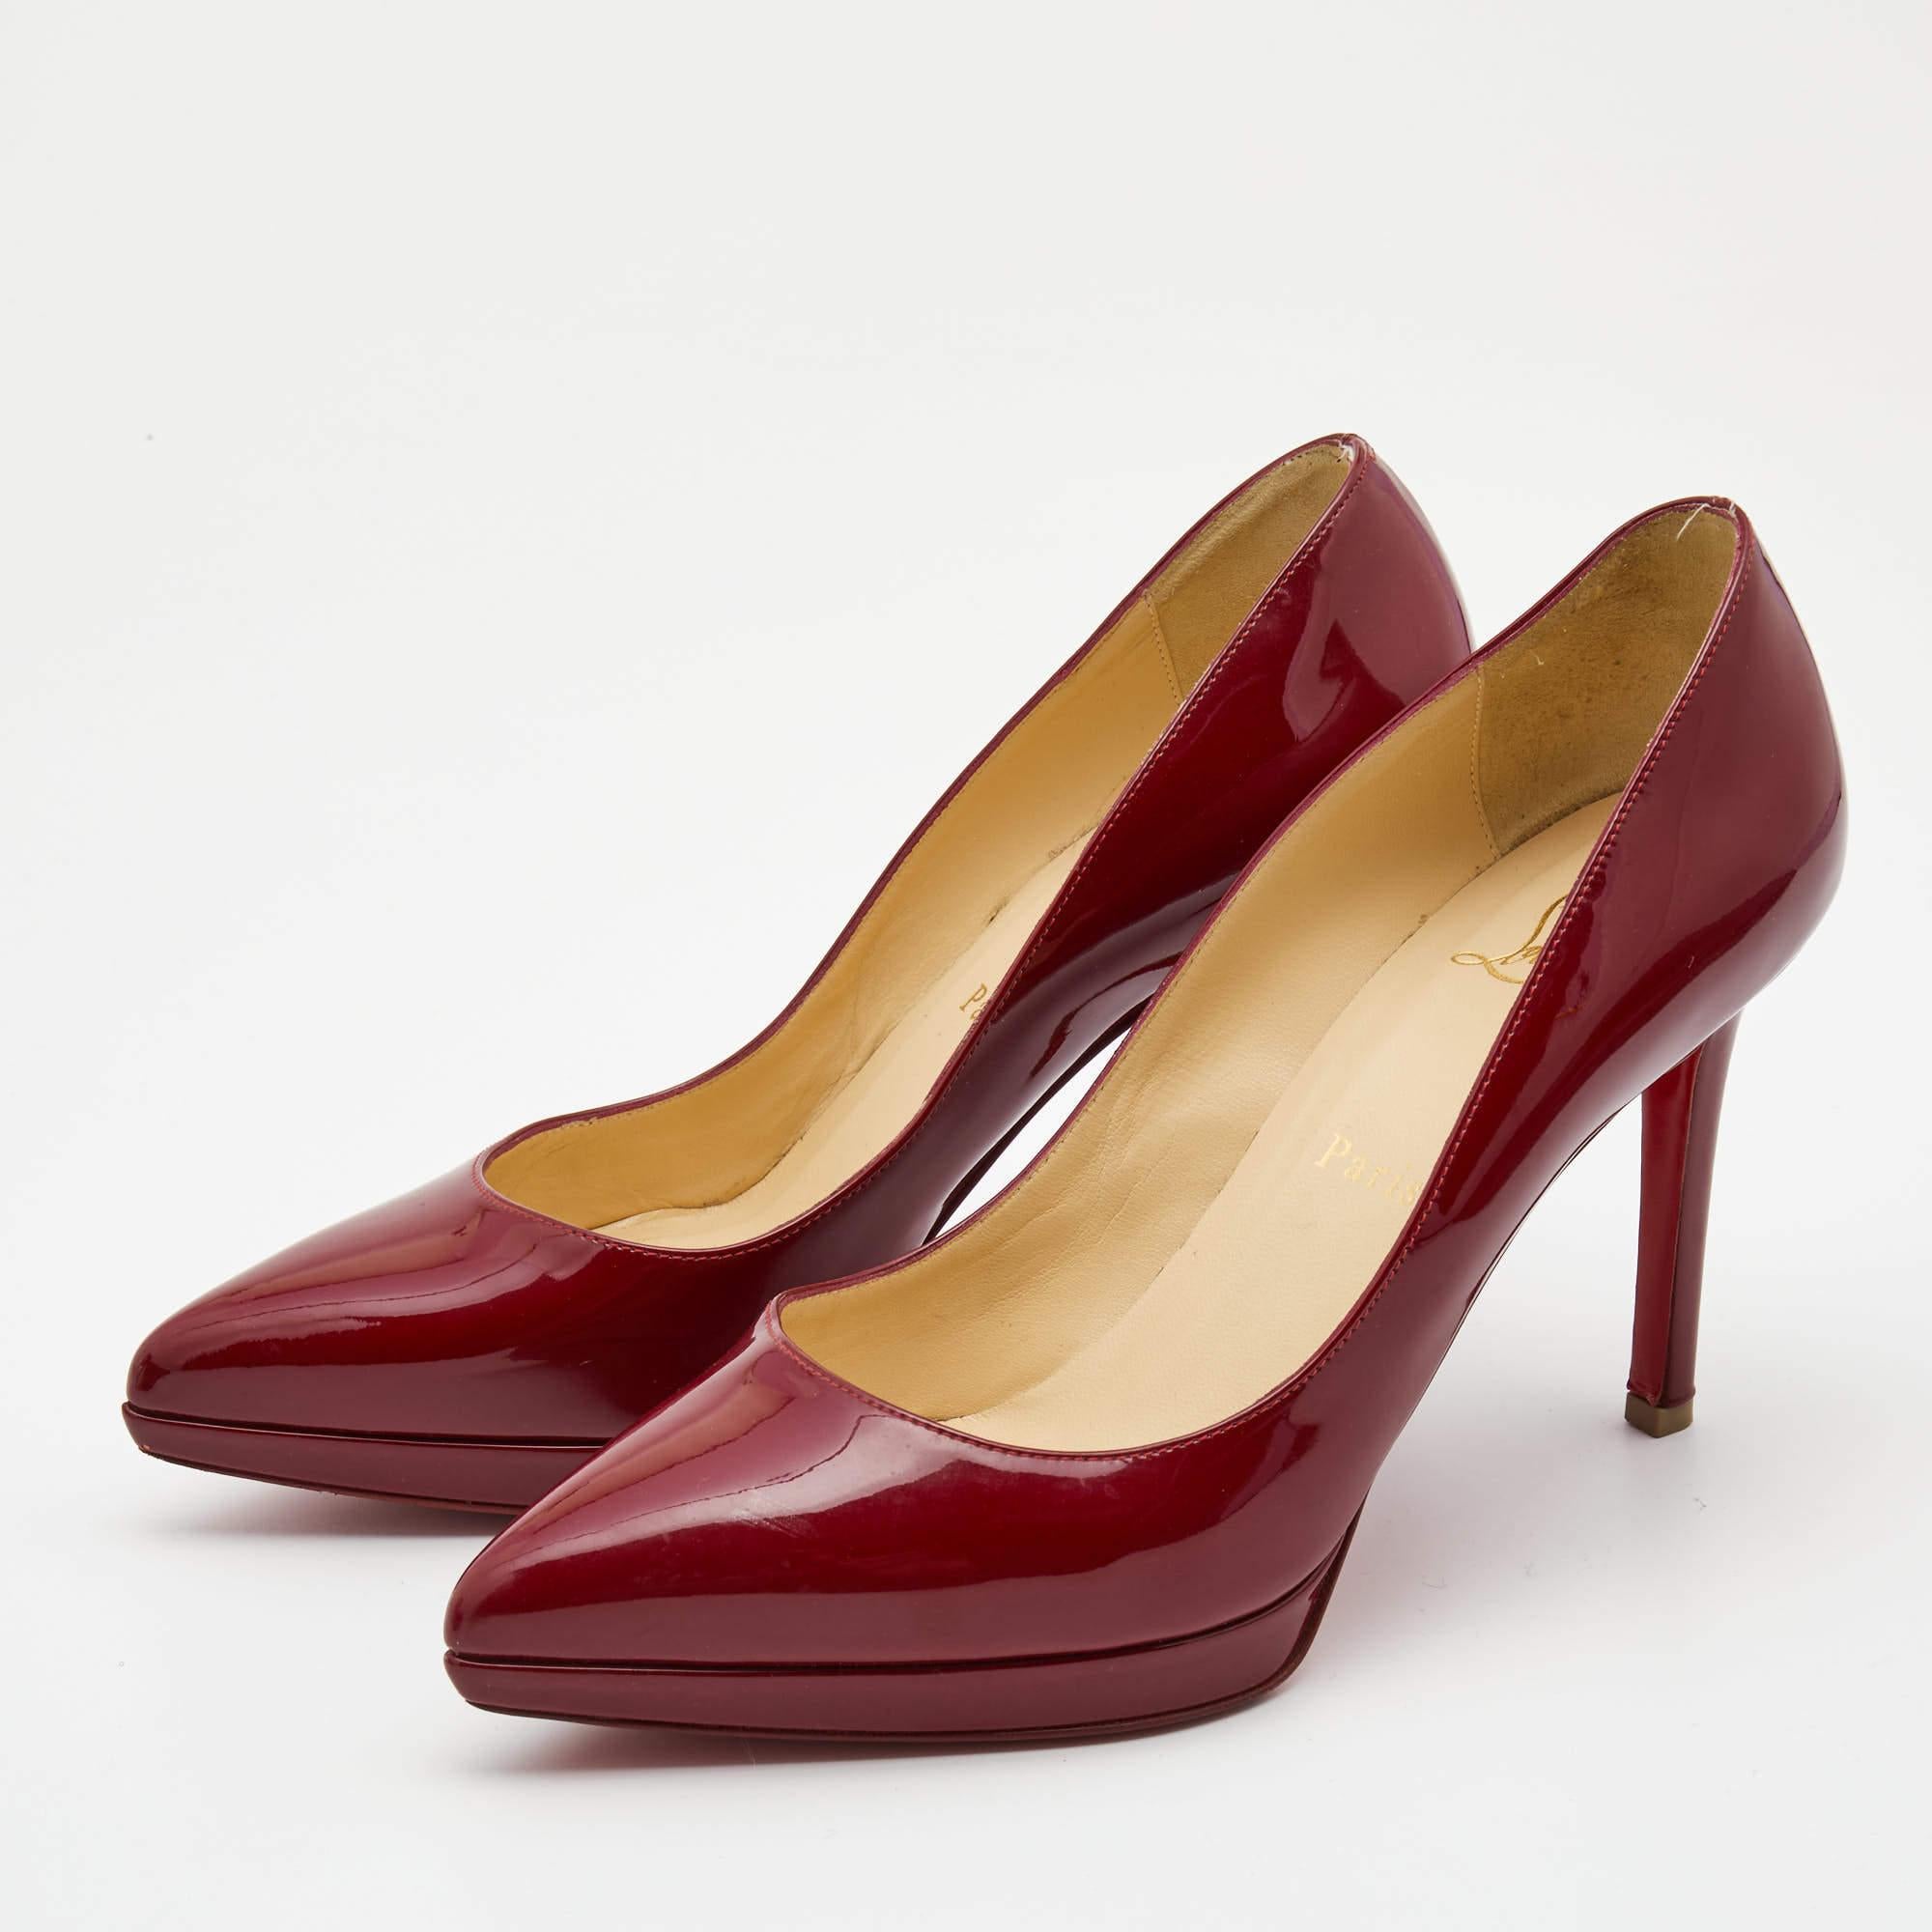 Brown Christian Louboutin Burgundy Patent Leather Pigalle Plato Pumps Size 37.5